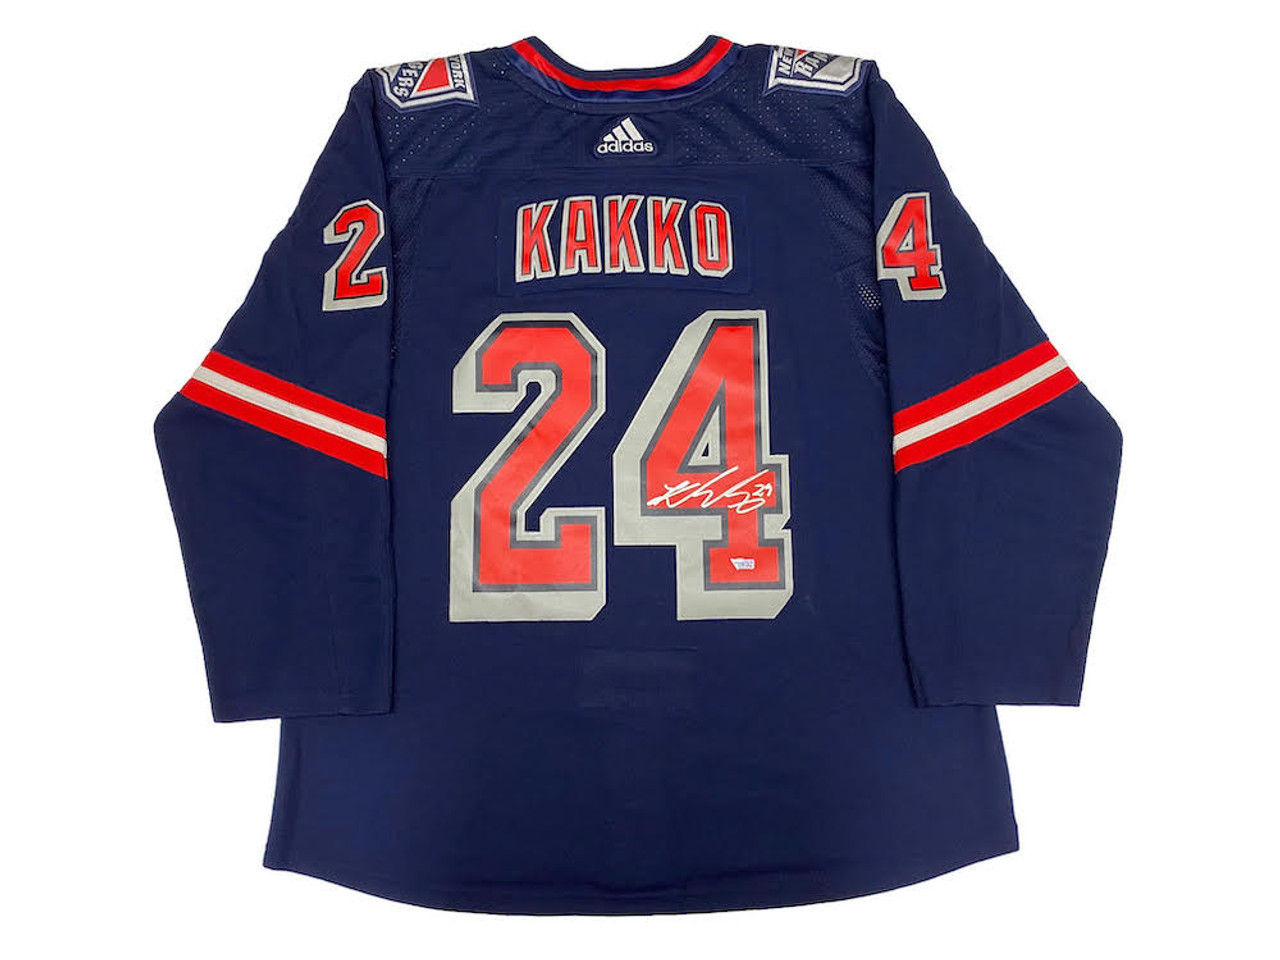 Kaapo Kakko New York Rangers Autographed Blue Fanatics Breakaway Jersey -  Autographed NHL Jerseys at 's Sports Collectibles Store